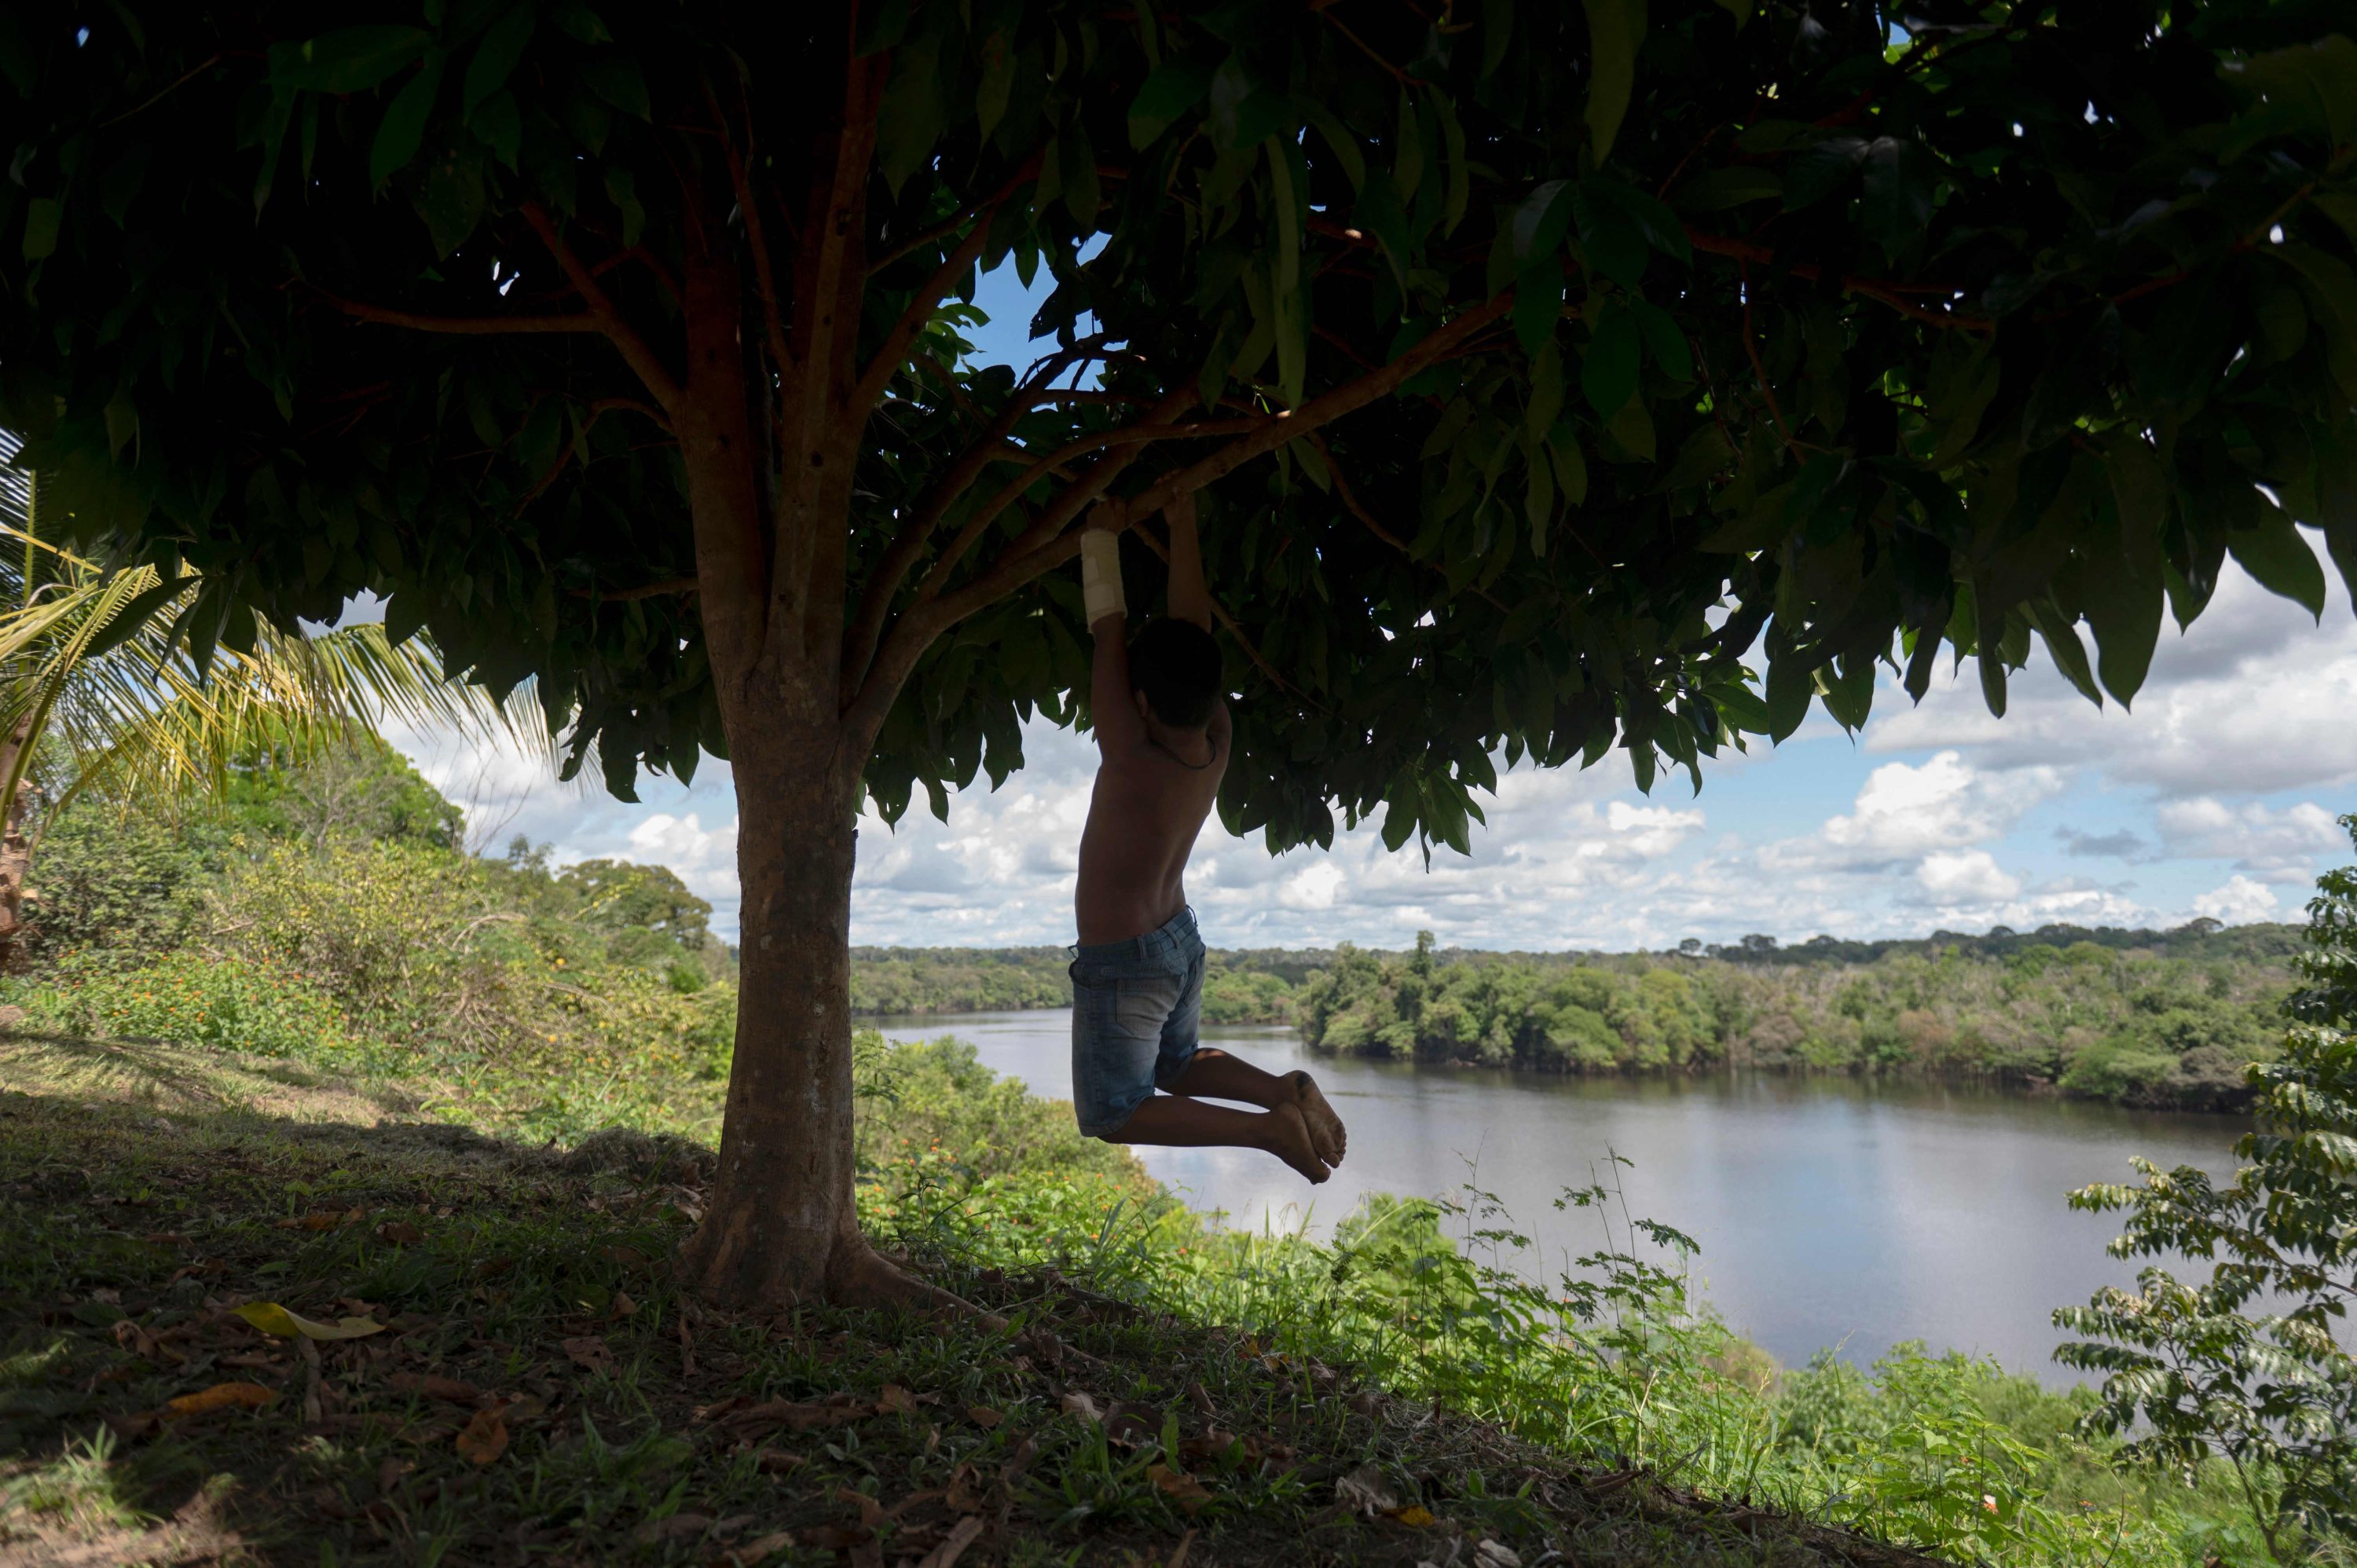 A child plays on a tree in the Boa Fe riverside community, on the banks of the Manicore river, deep in the Amazon rainforest in Brazil's Amazonas State, June 7, 2022. (AFP Photo)